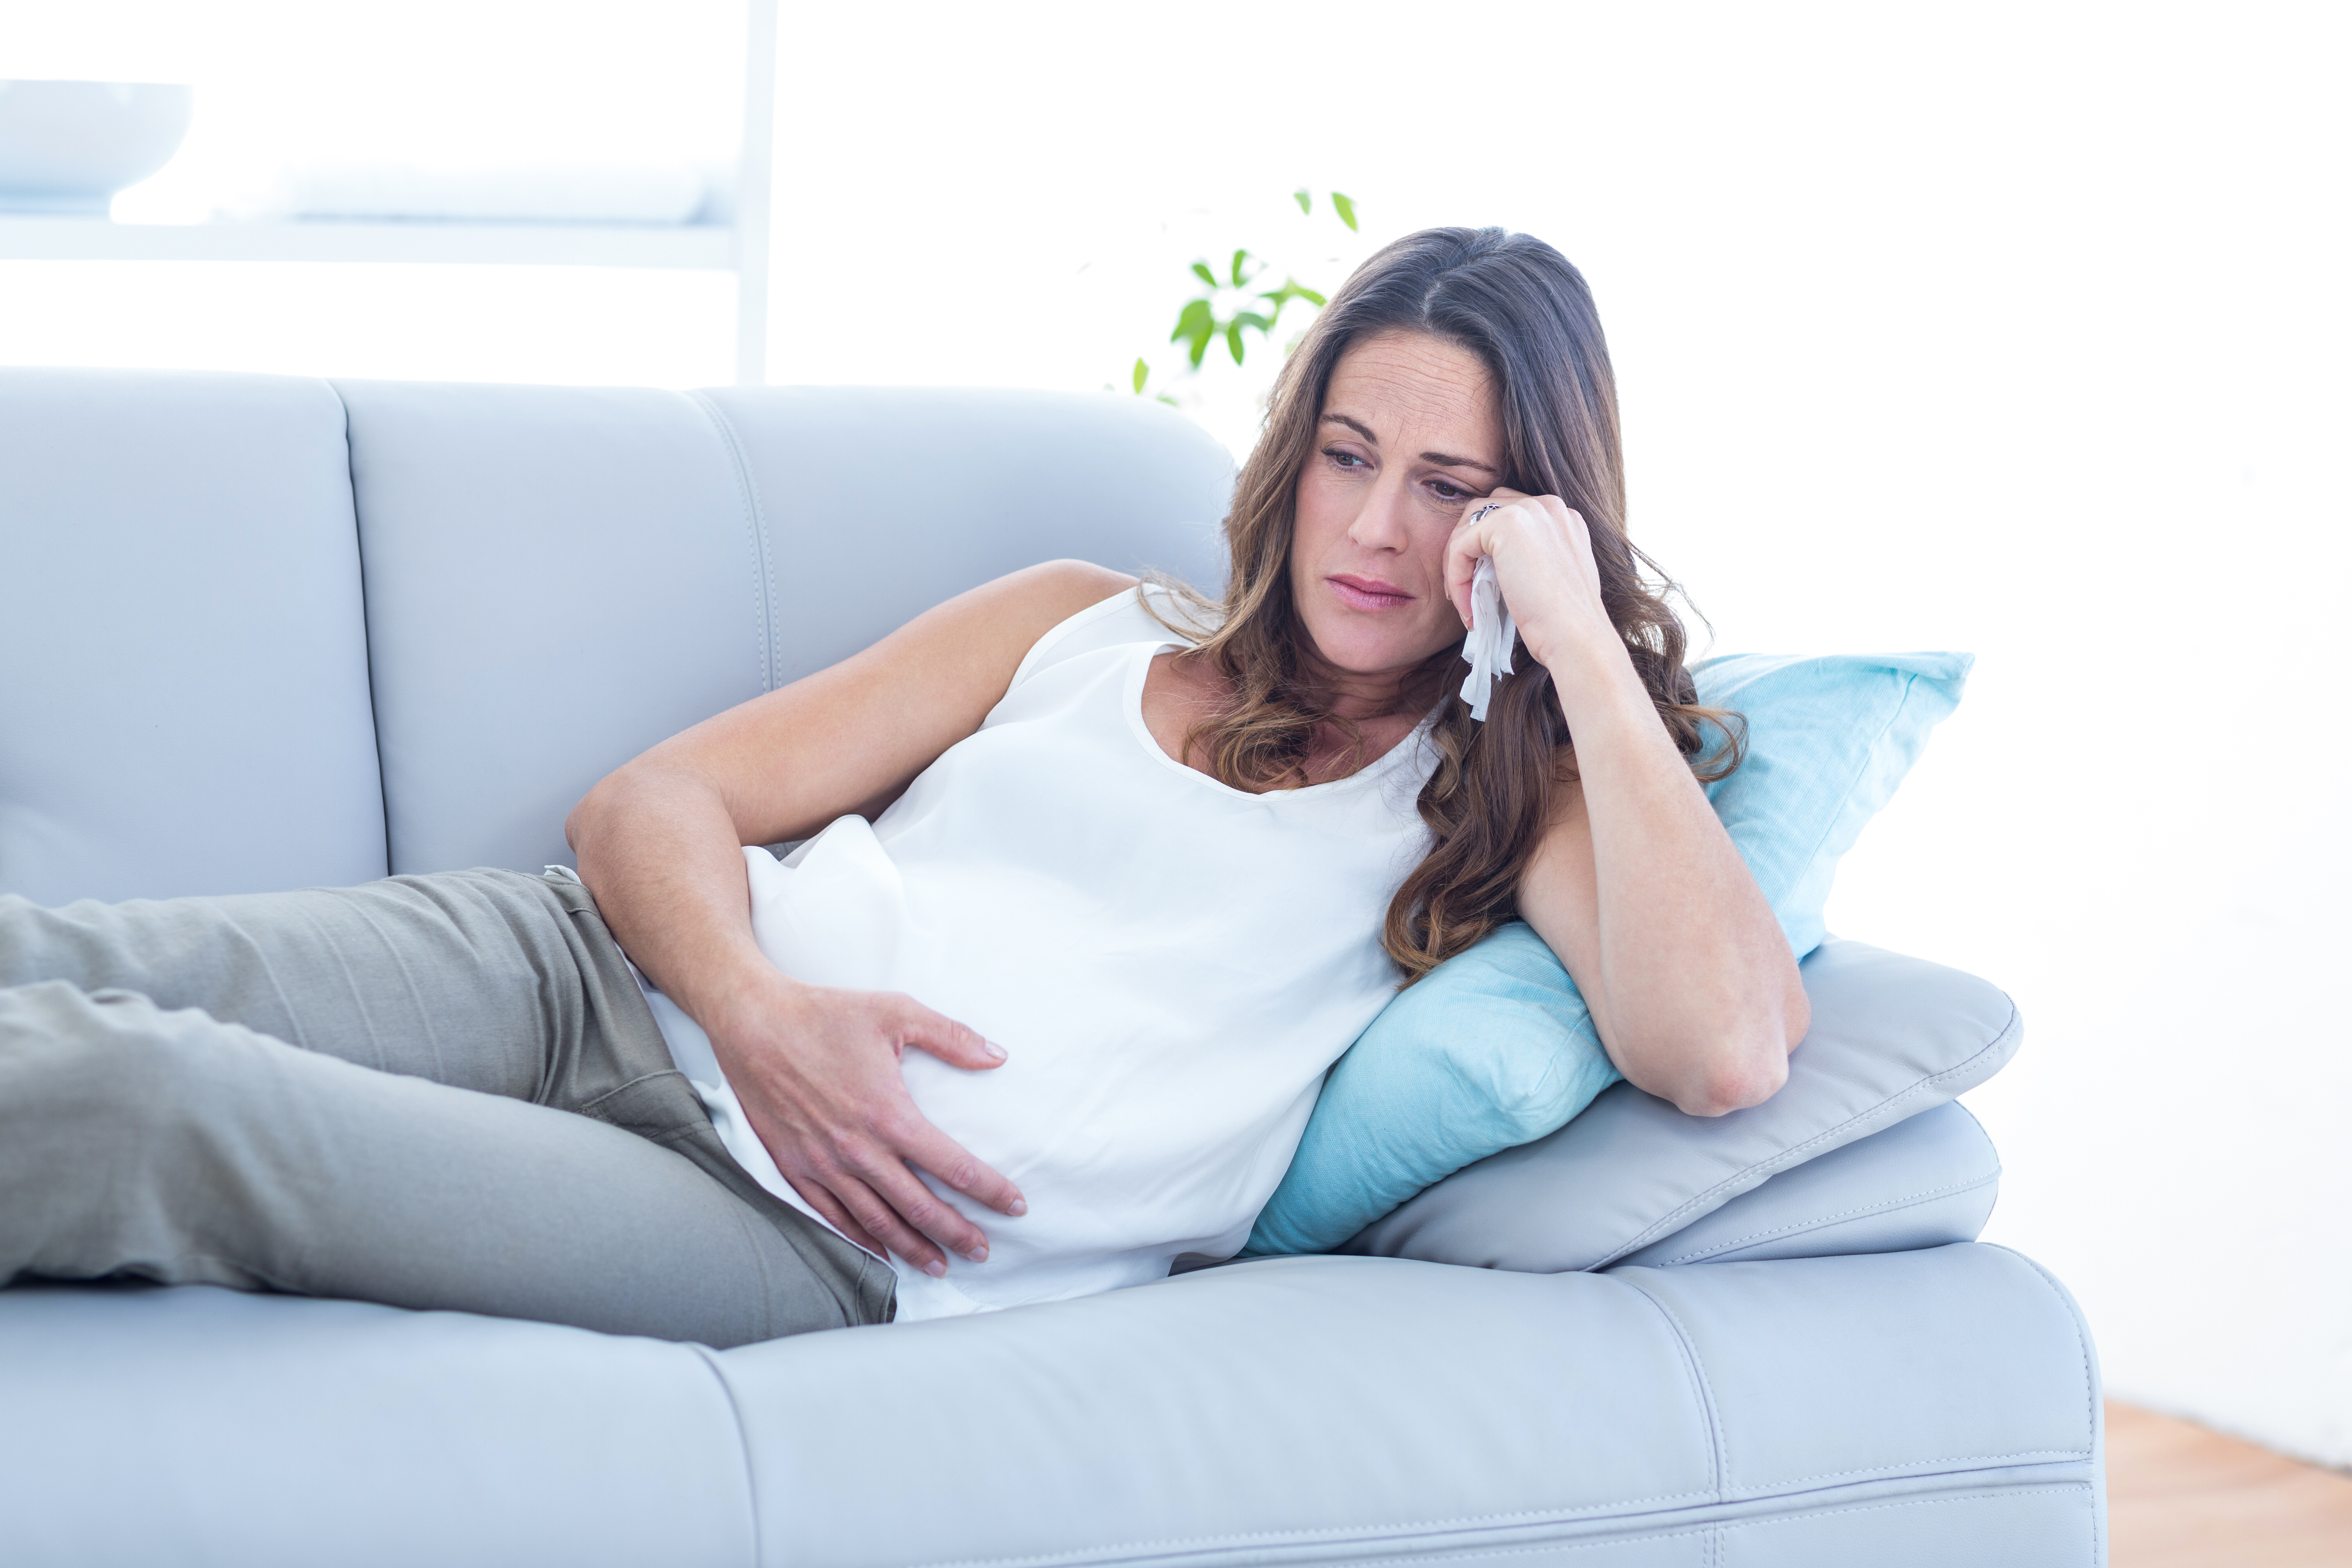 A pregnant woman sitting on a couch looking sad | Source: Shutterstock